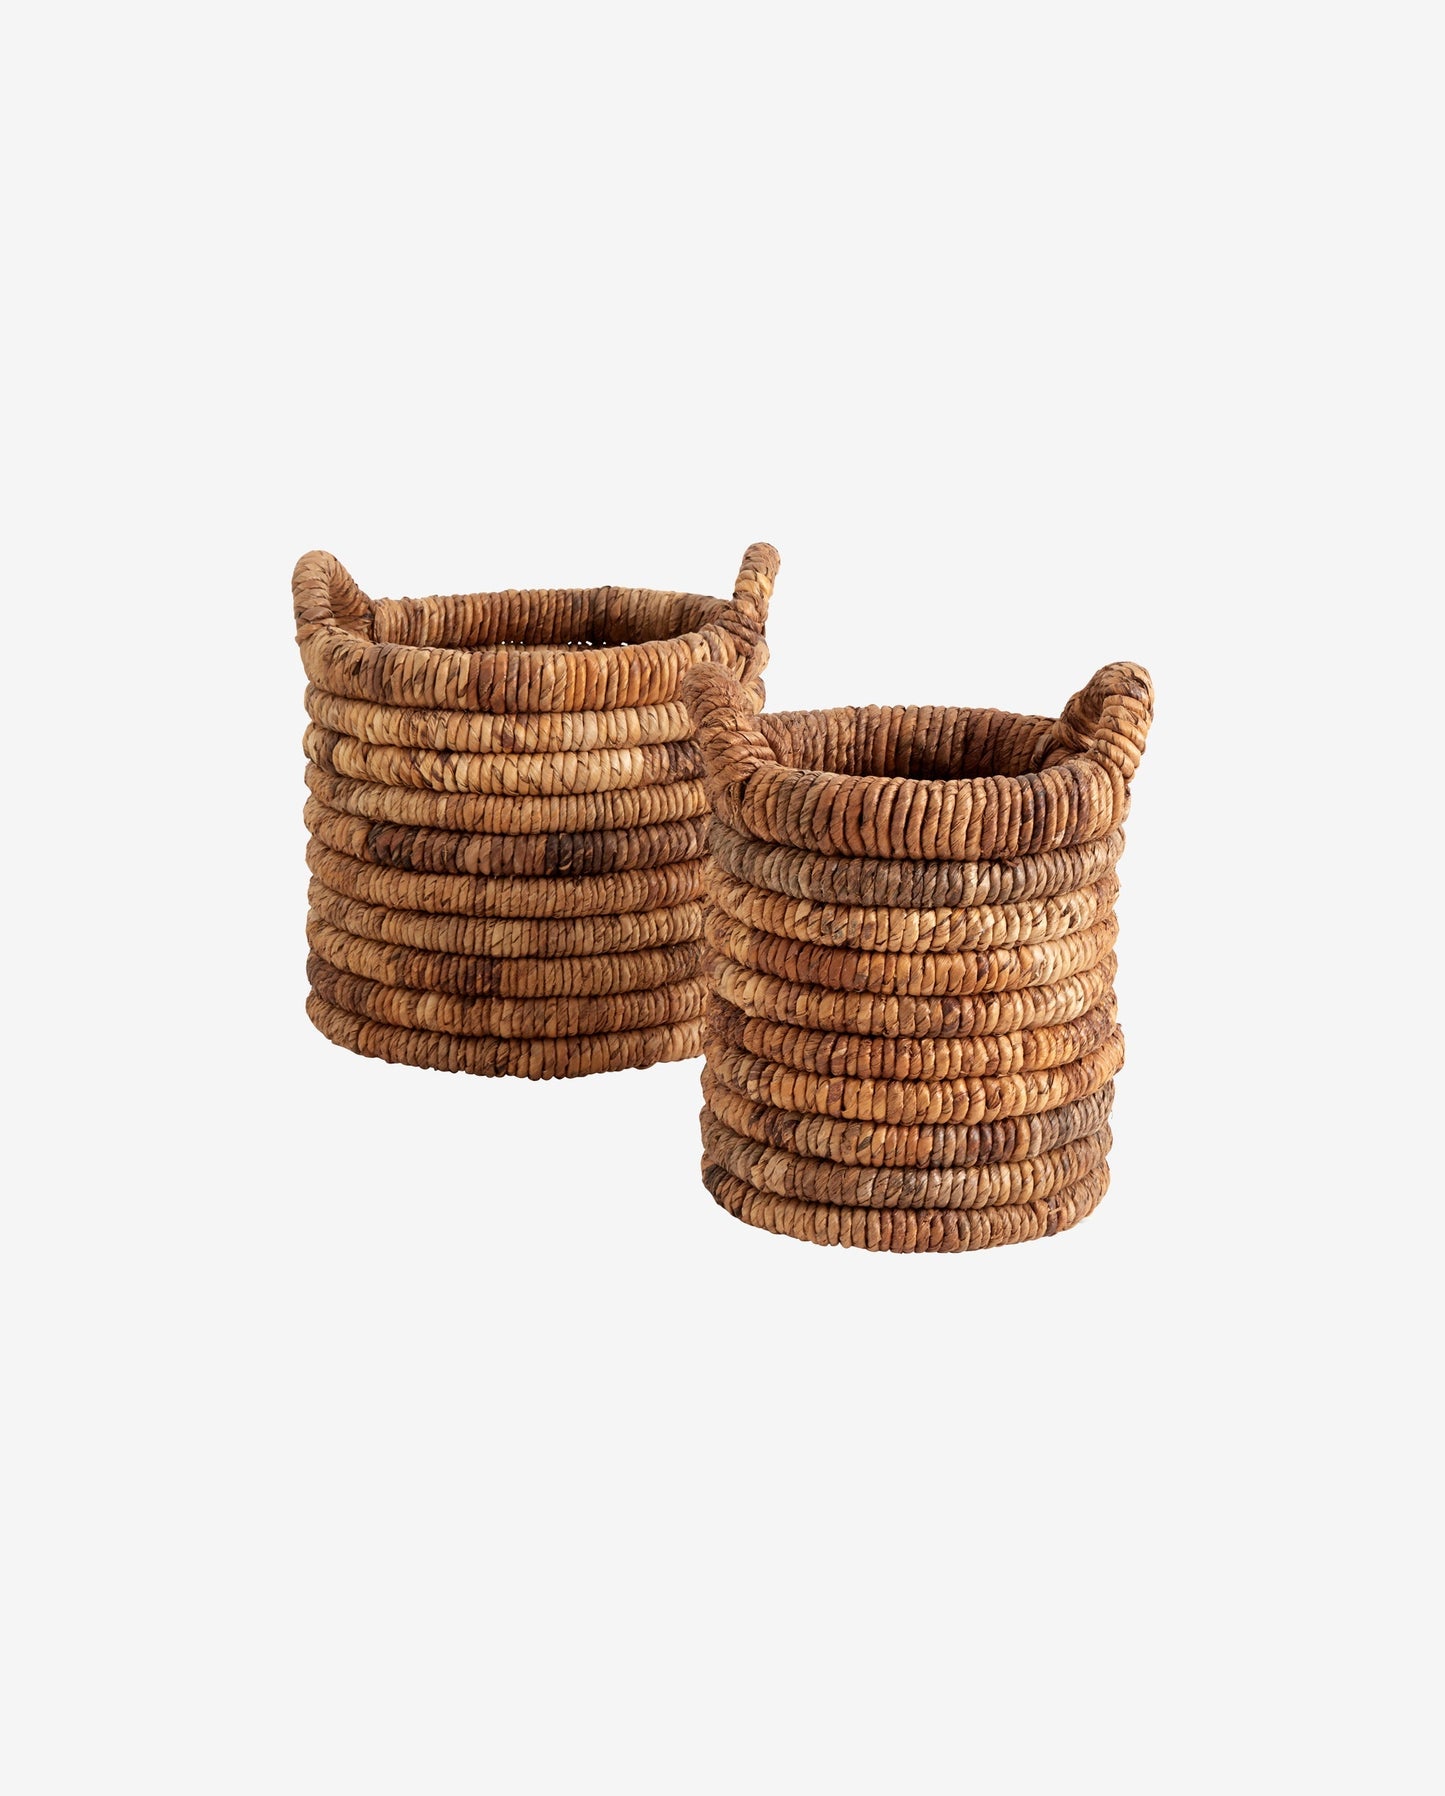 Nordal ABACA round baskets, s/2, natural